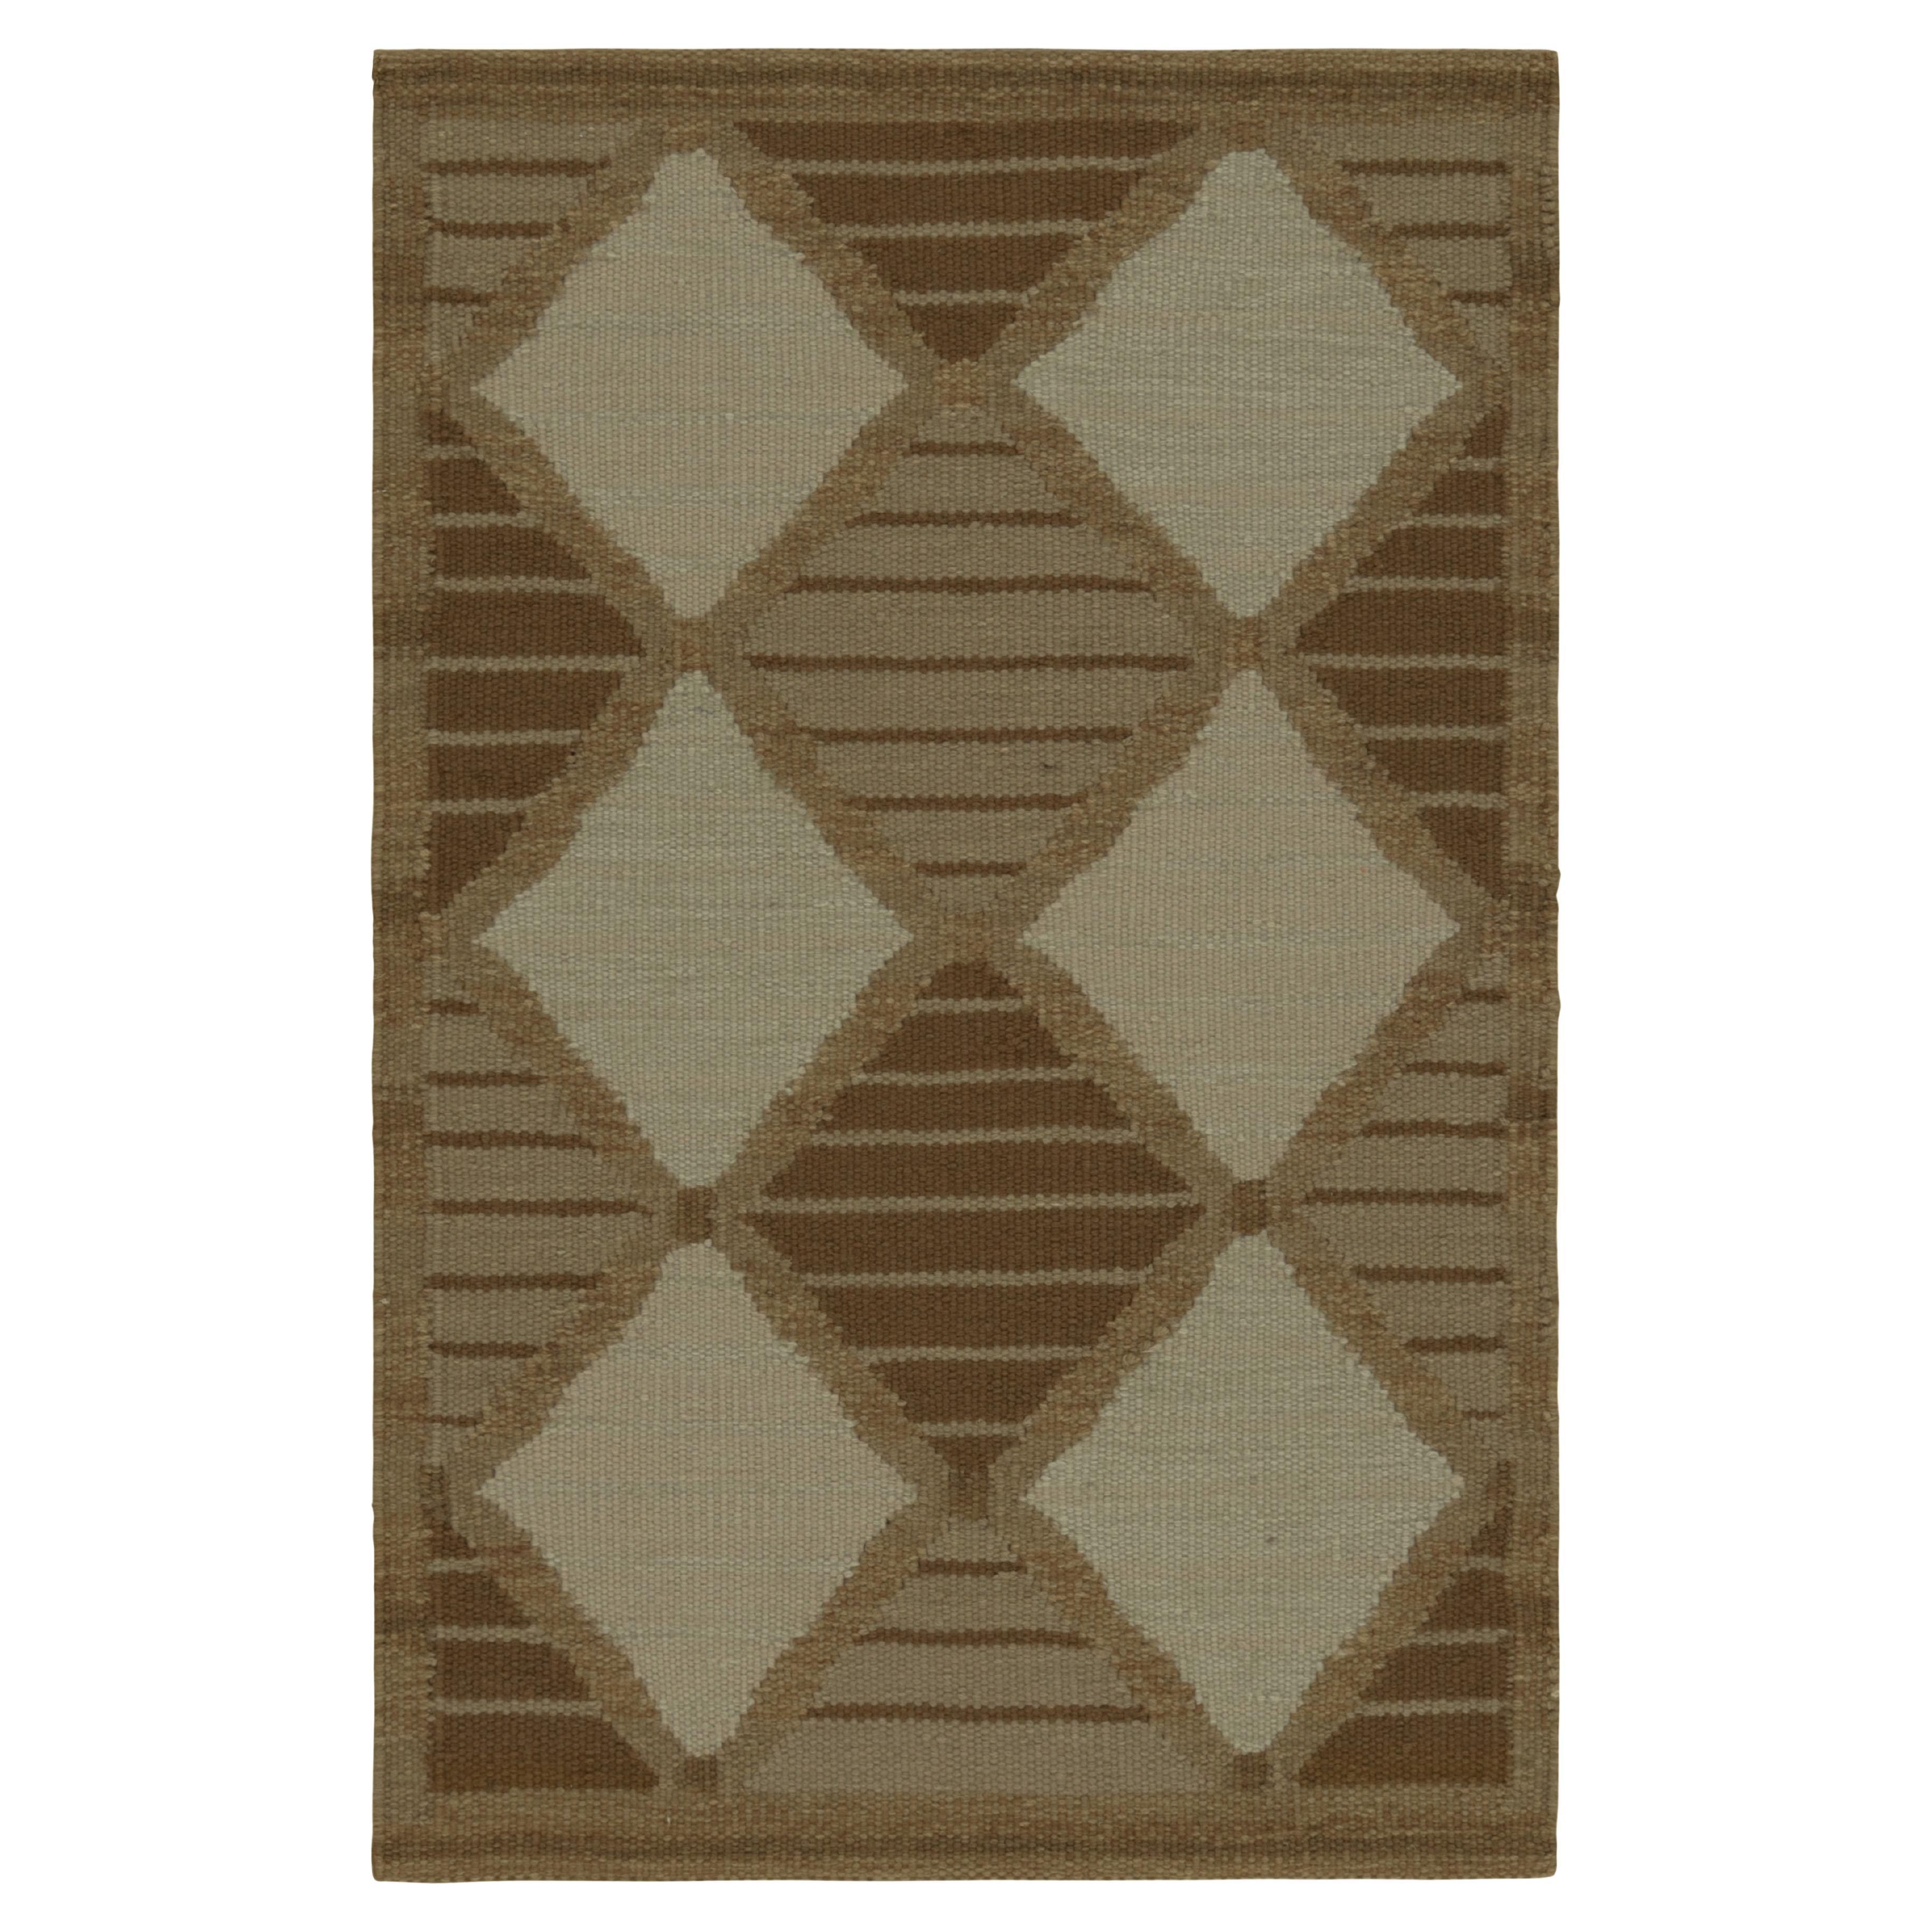 Rug & Kilim’s Scandinavian Style Rug with Beige and Taupe Diamonds and Stripes